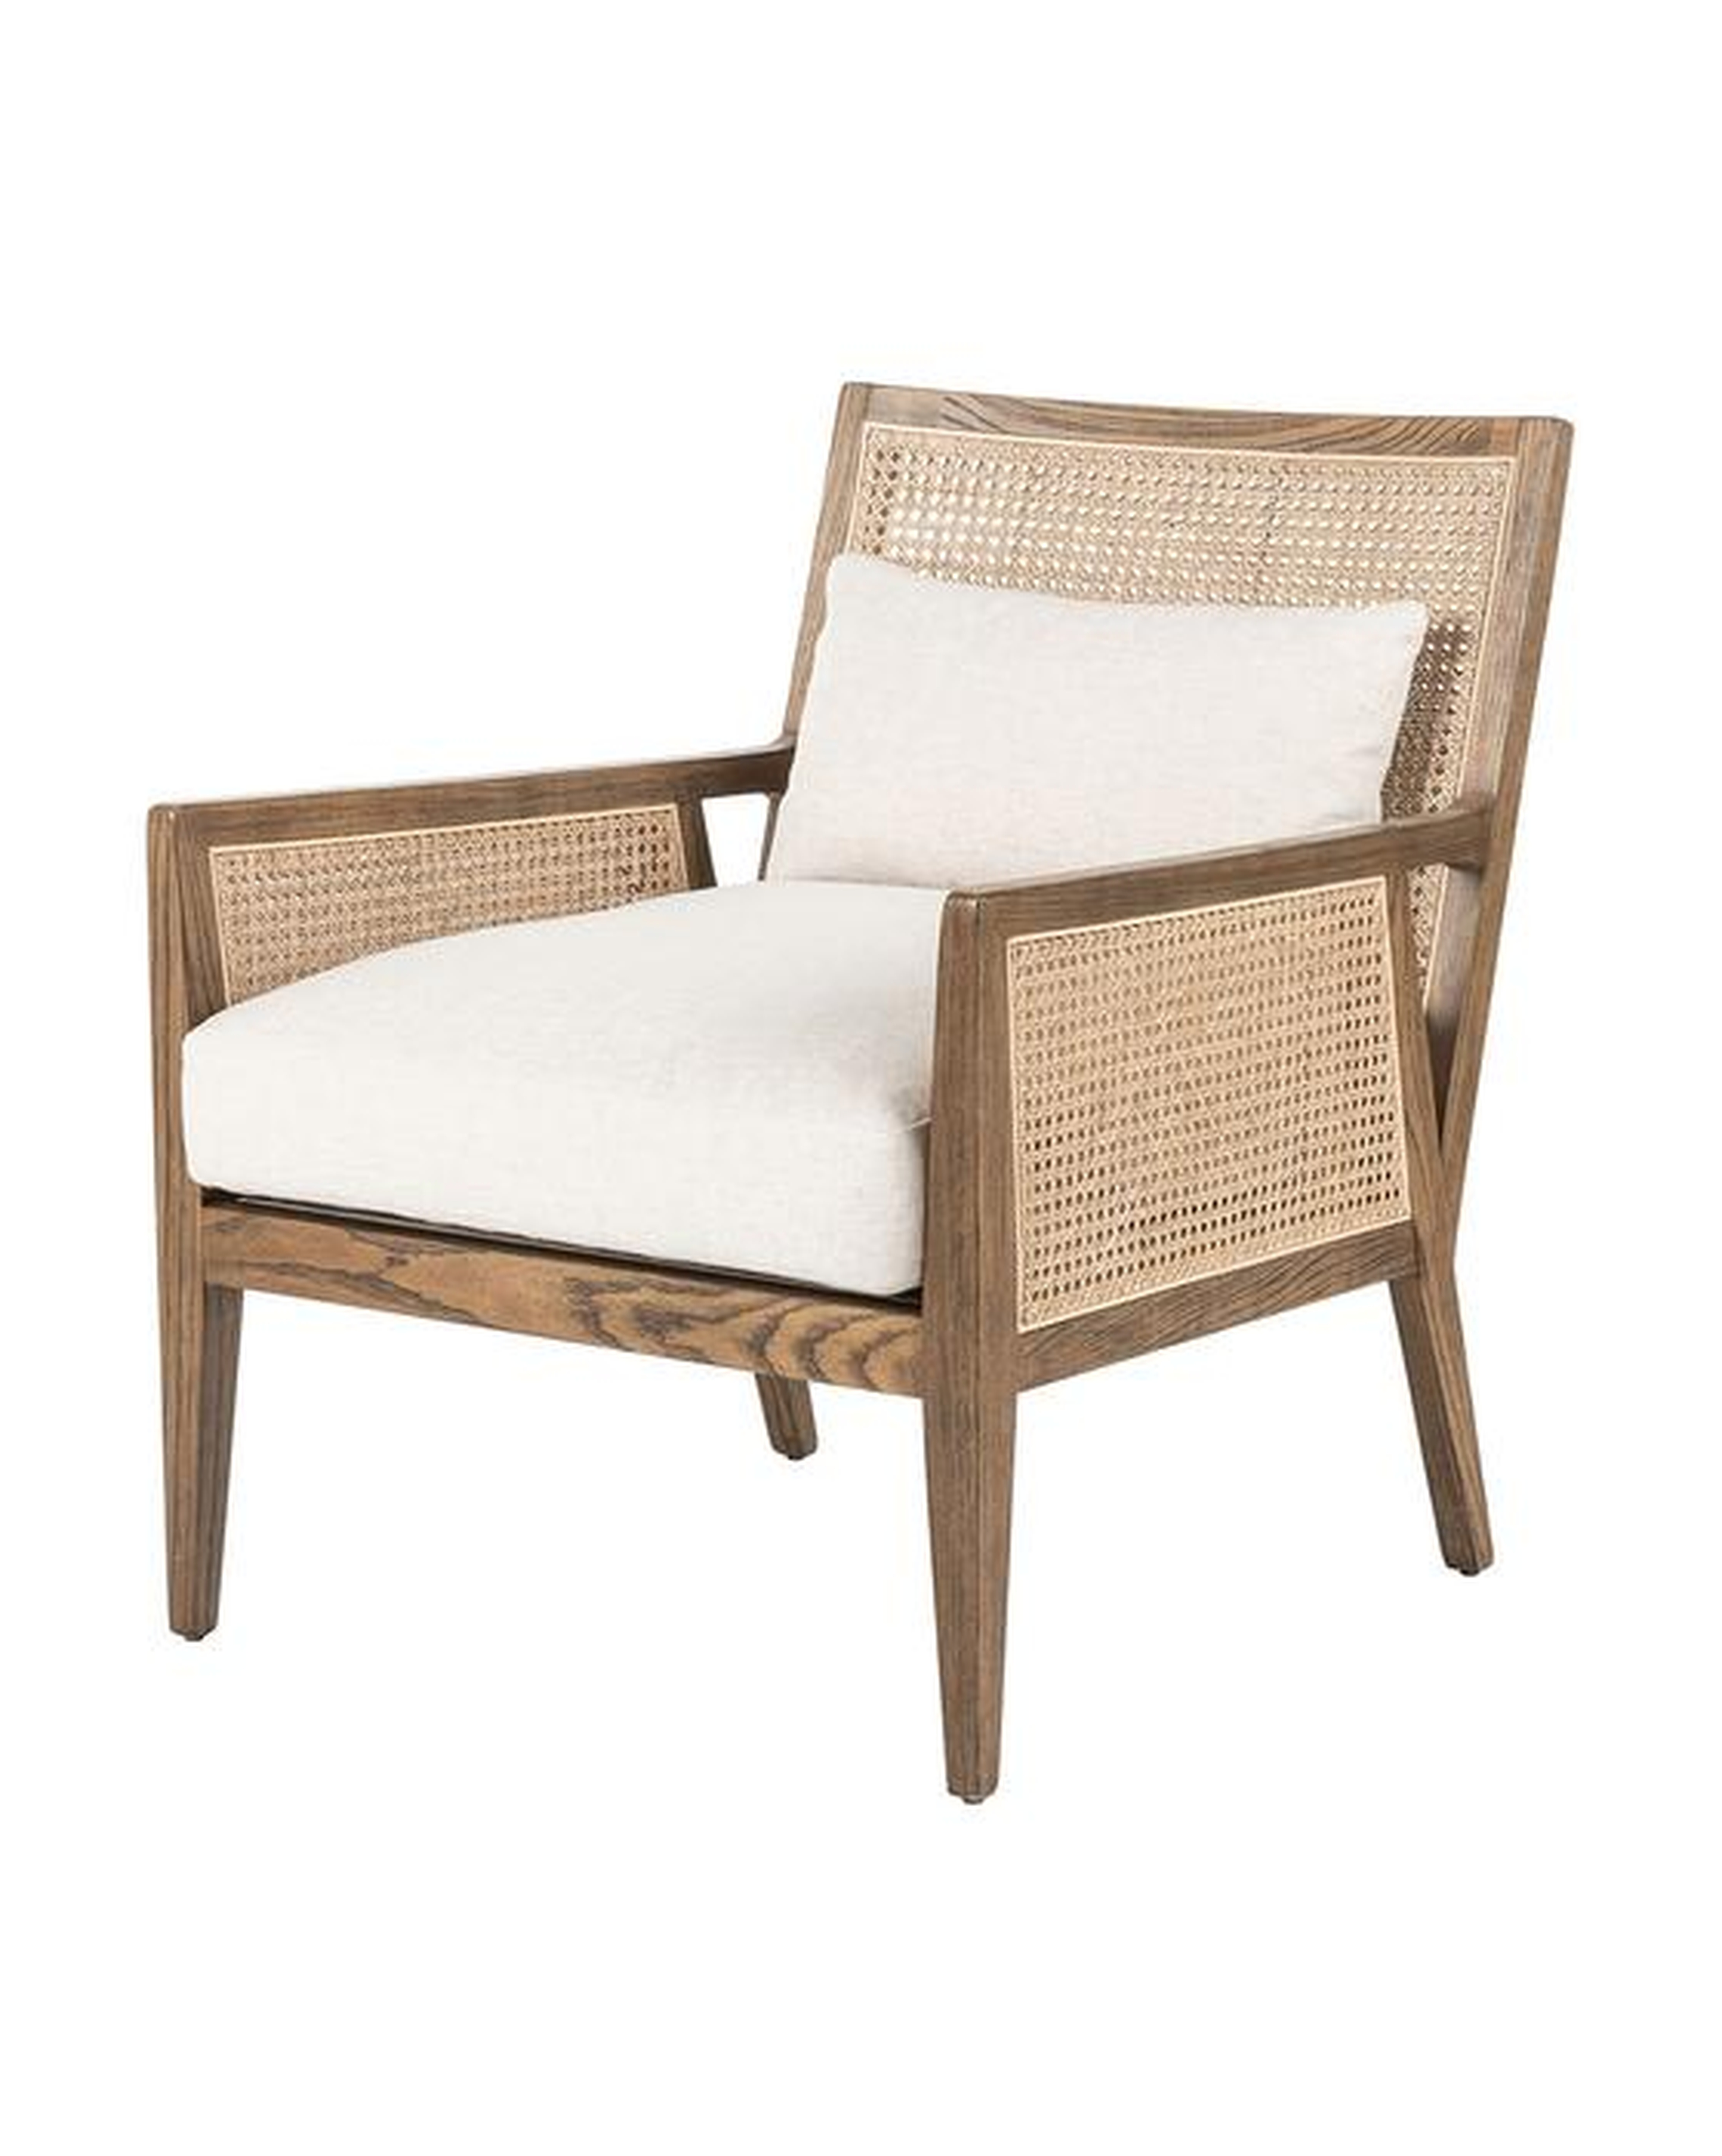 Landon Lounge Chair, Toasted Parawood - McGee & Co.